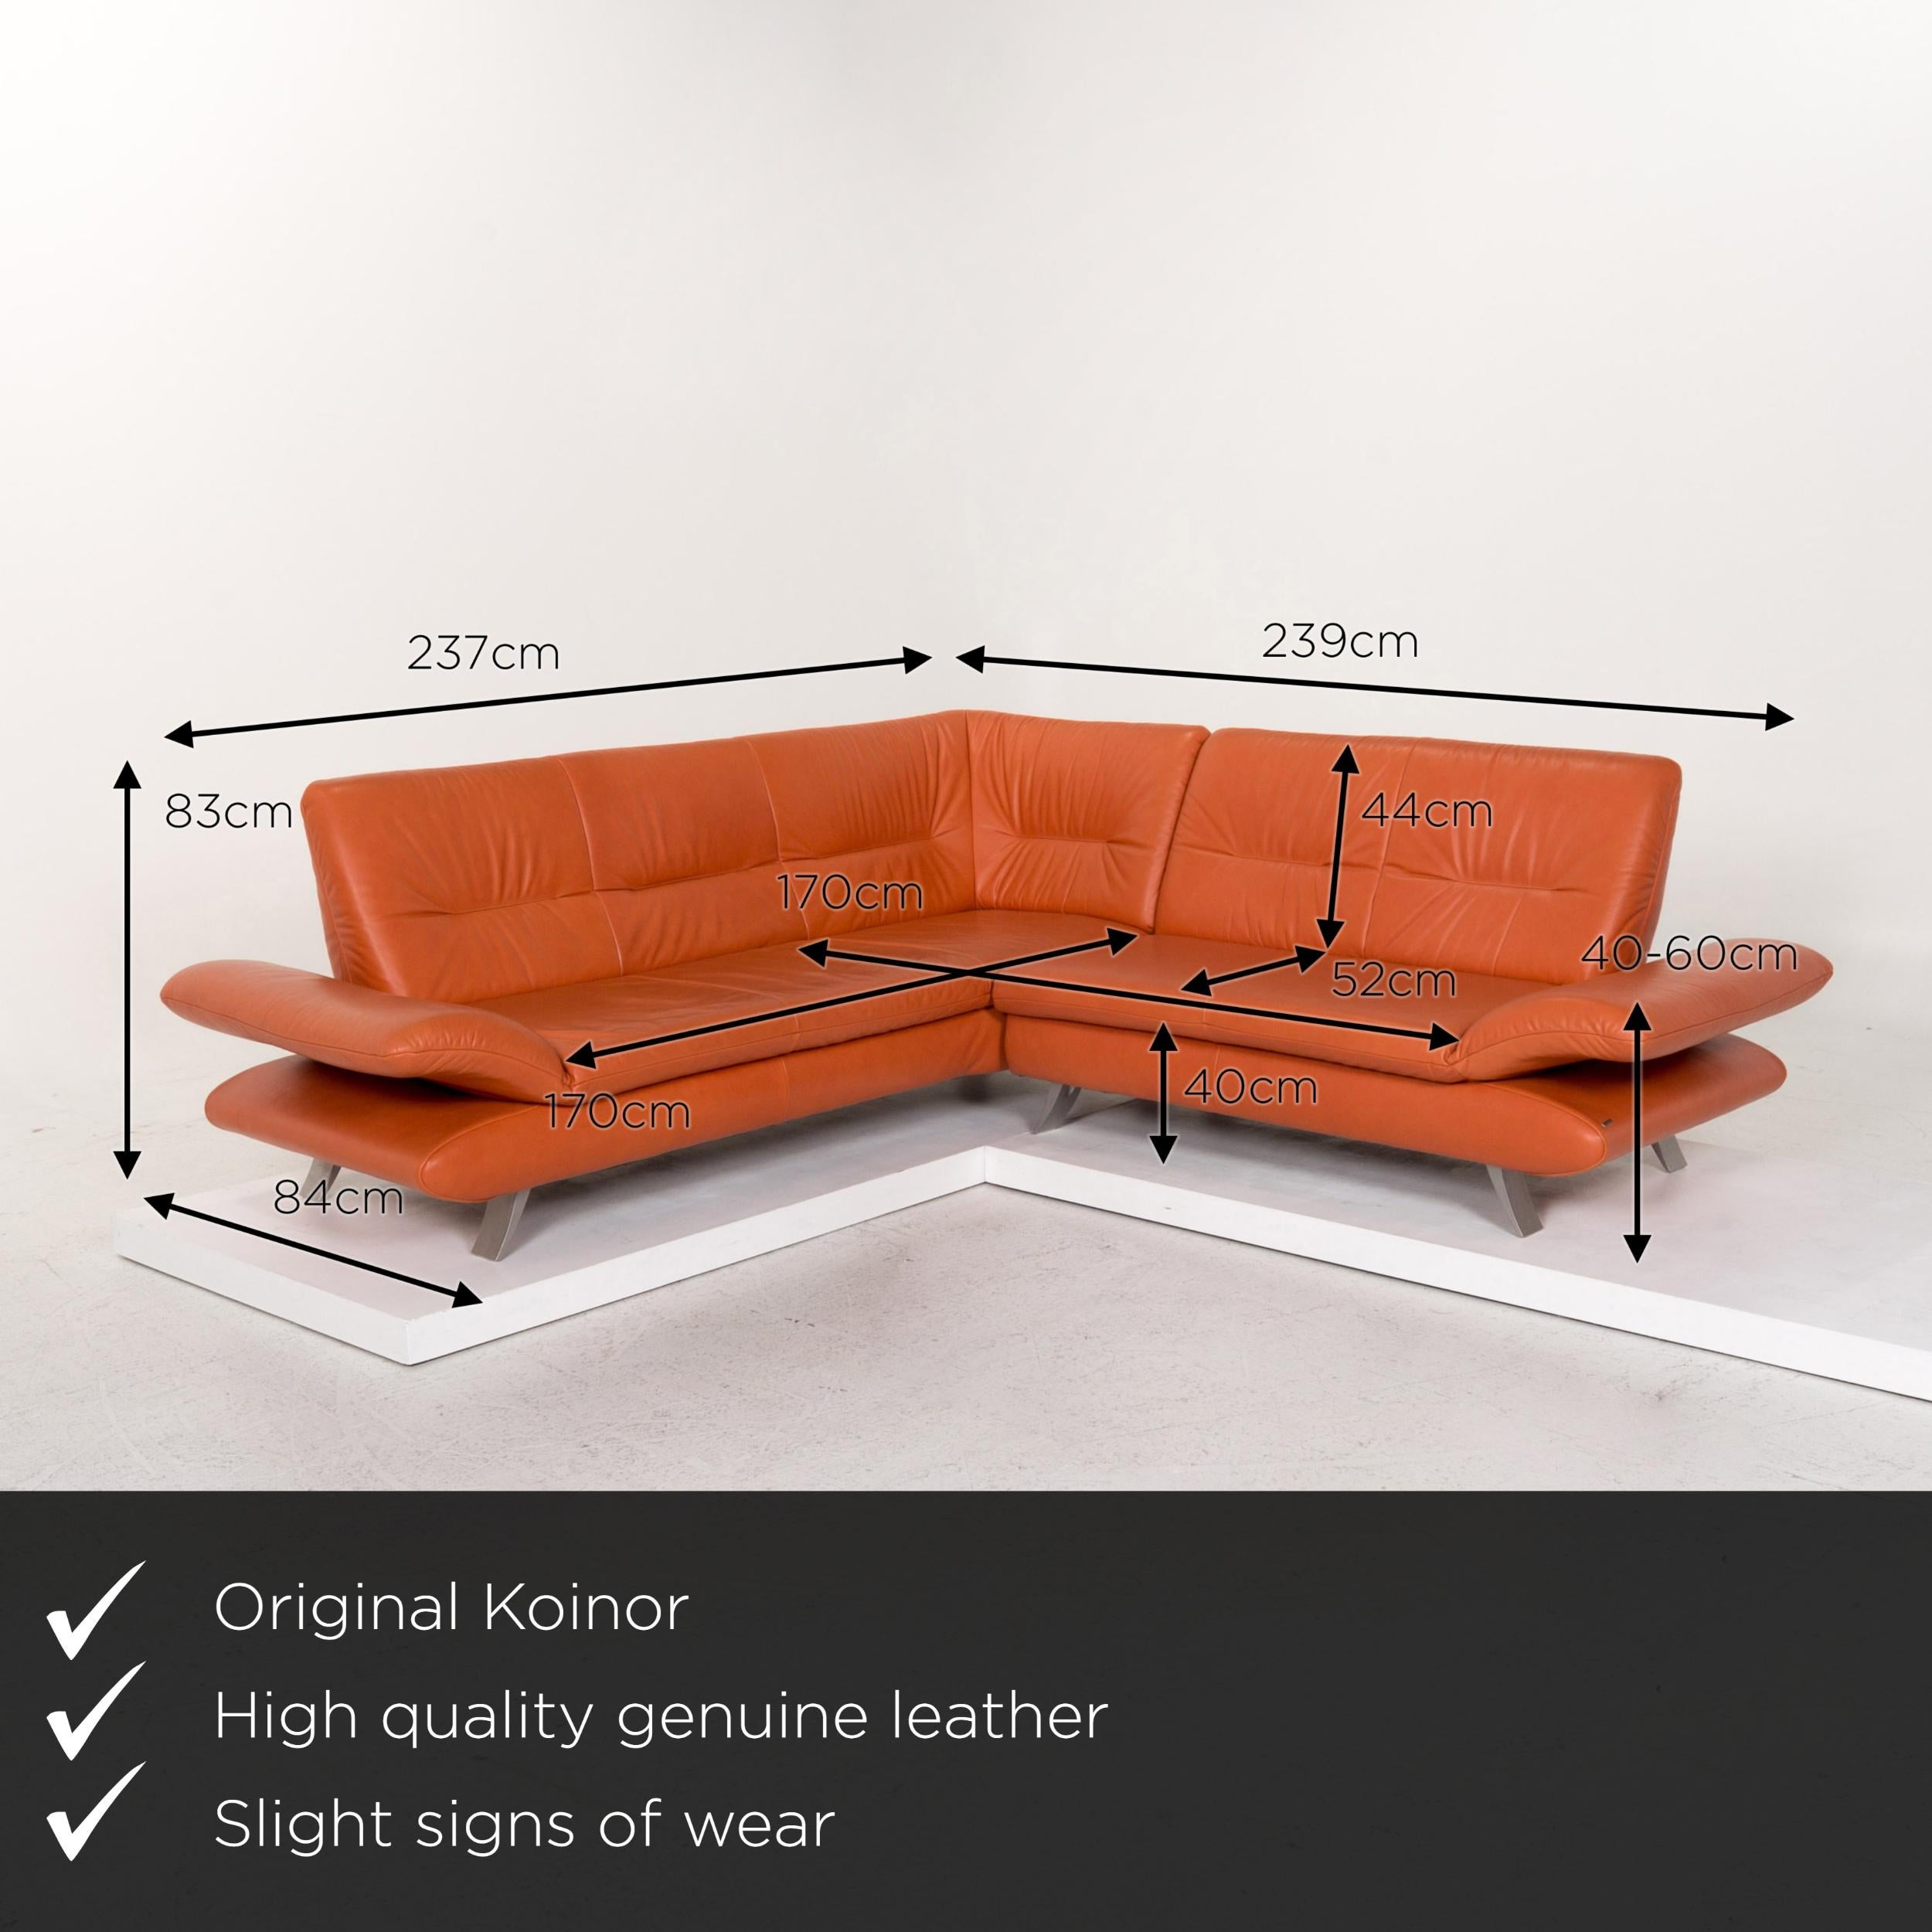 We present to you a Koinor Rossini leather corner sofa terracotta orange sofa function couch.
 

 Product measurements in centimeters:
 

Depth 84
Width 237
Height 83
Seat height 40
Rest height 40
Seat depth 52
Seat width 170
Back